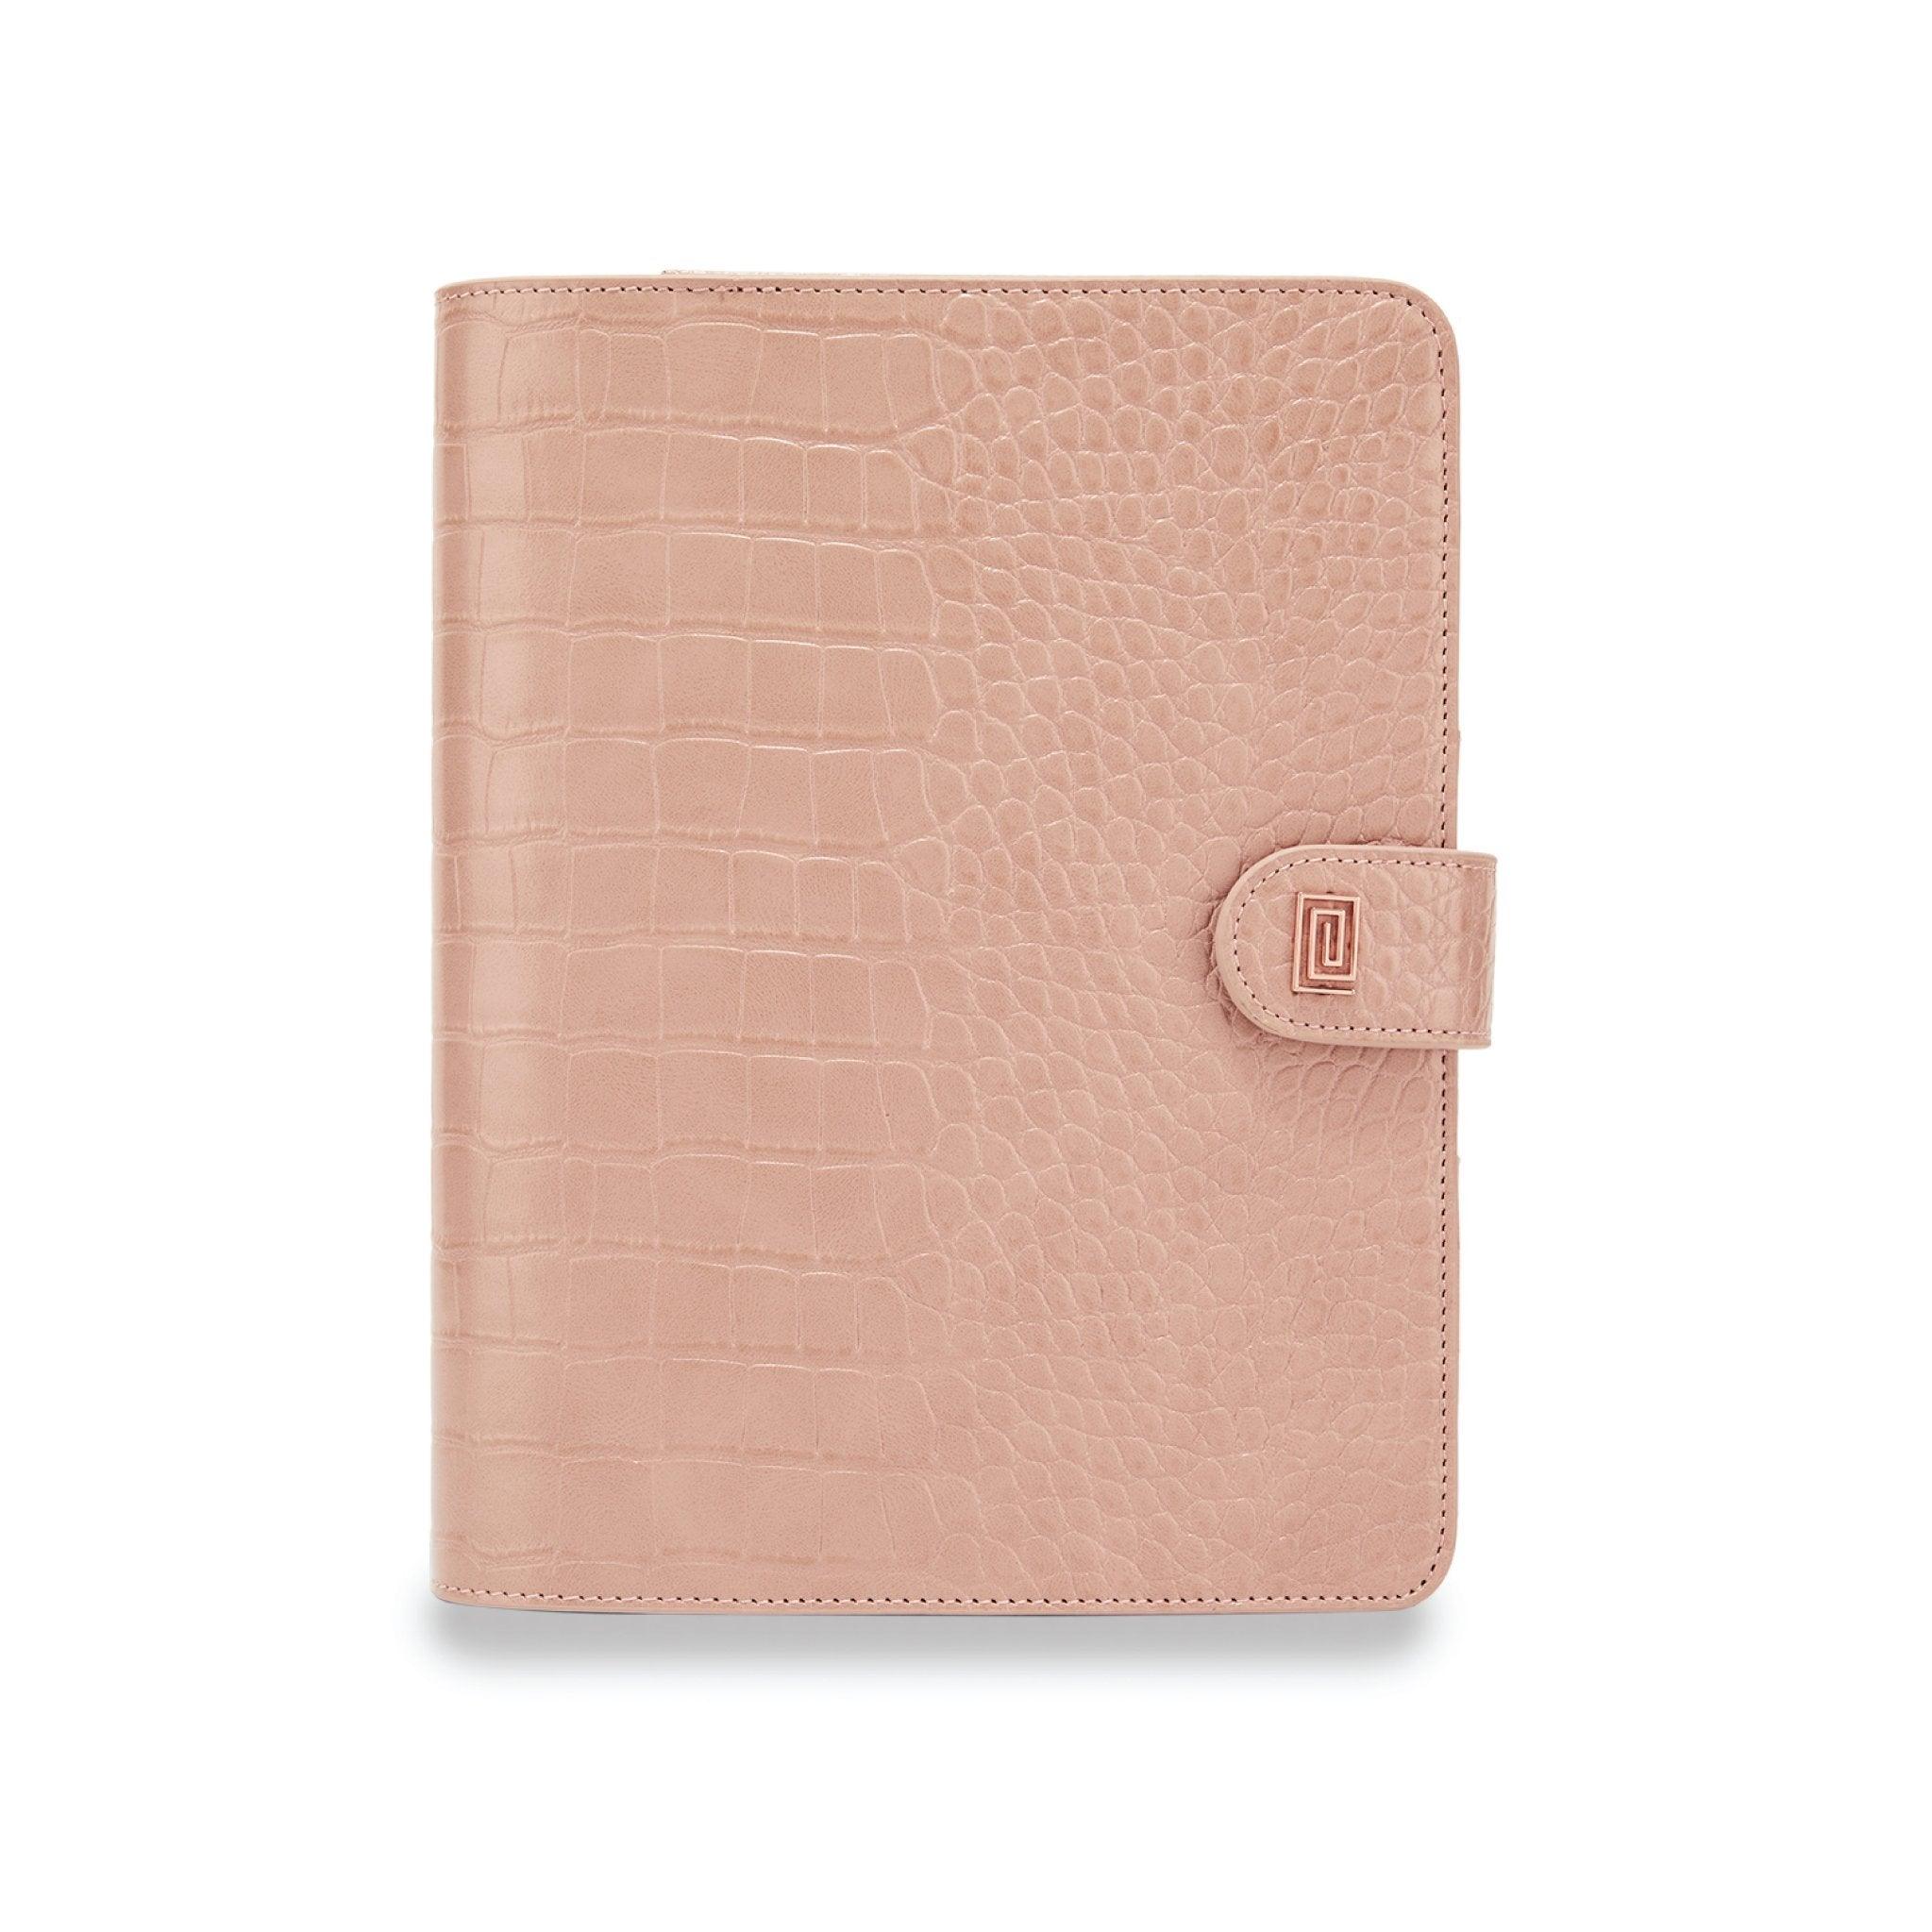 Rose Nude Croco Letra | OUTLET | XL5. Letra Plus Ringless Agenda | Letter 11 Disc or Coil Planner Cover | Final Sale | NOTIQ